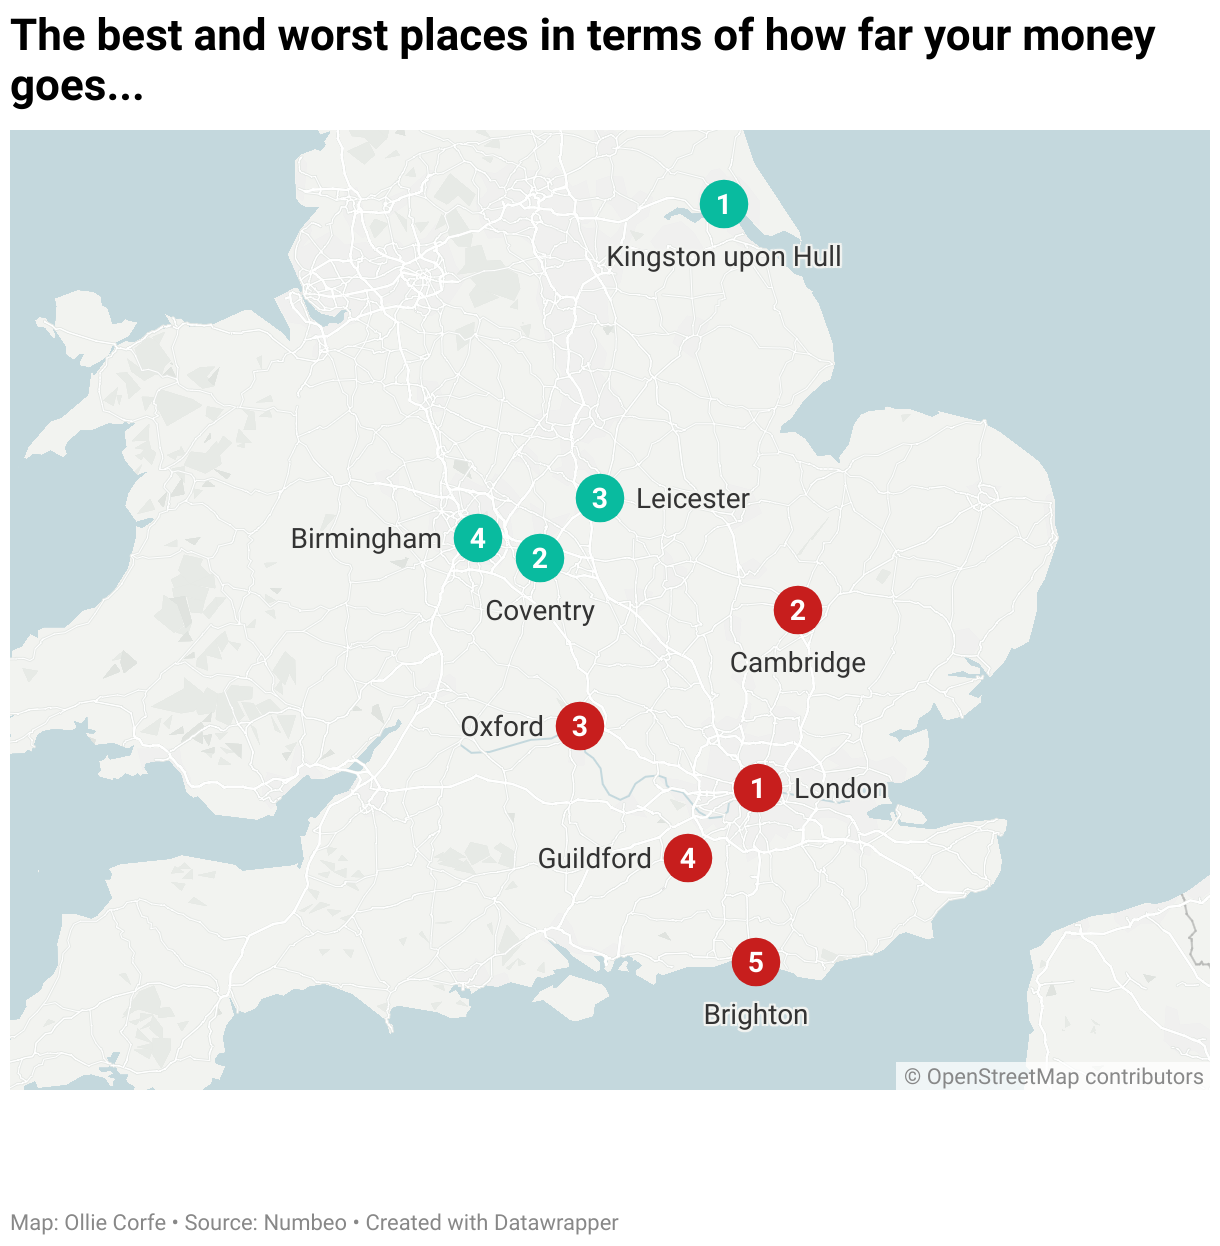 Map of most and least expensive cities in the UK.